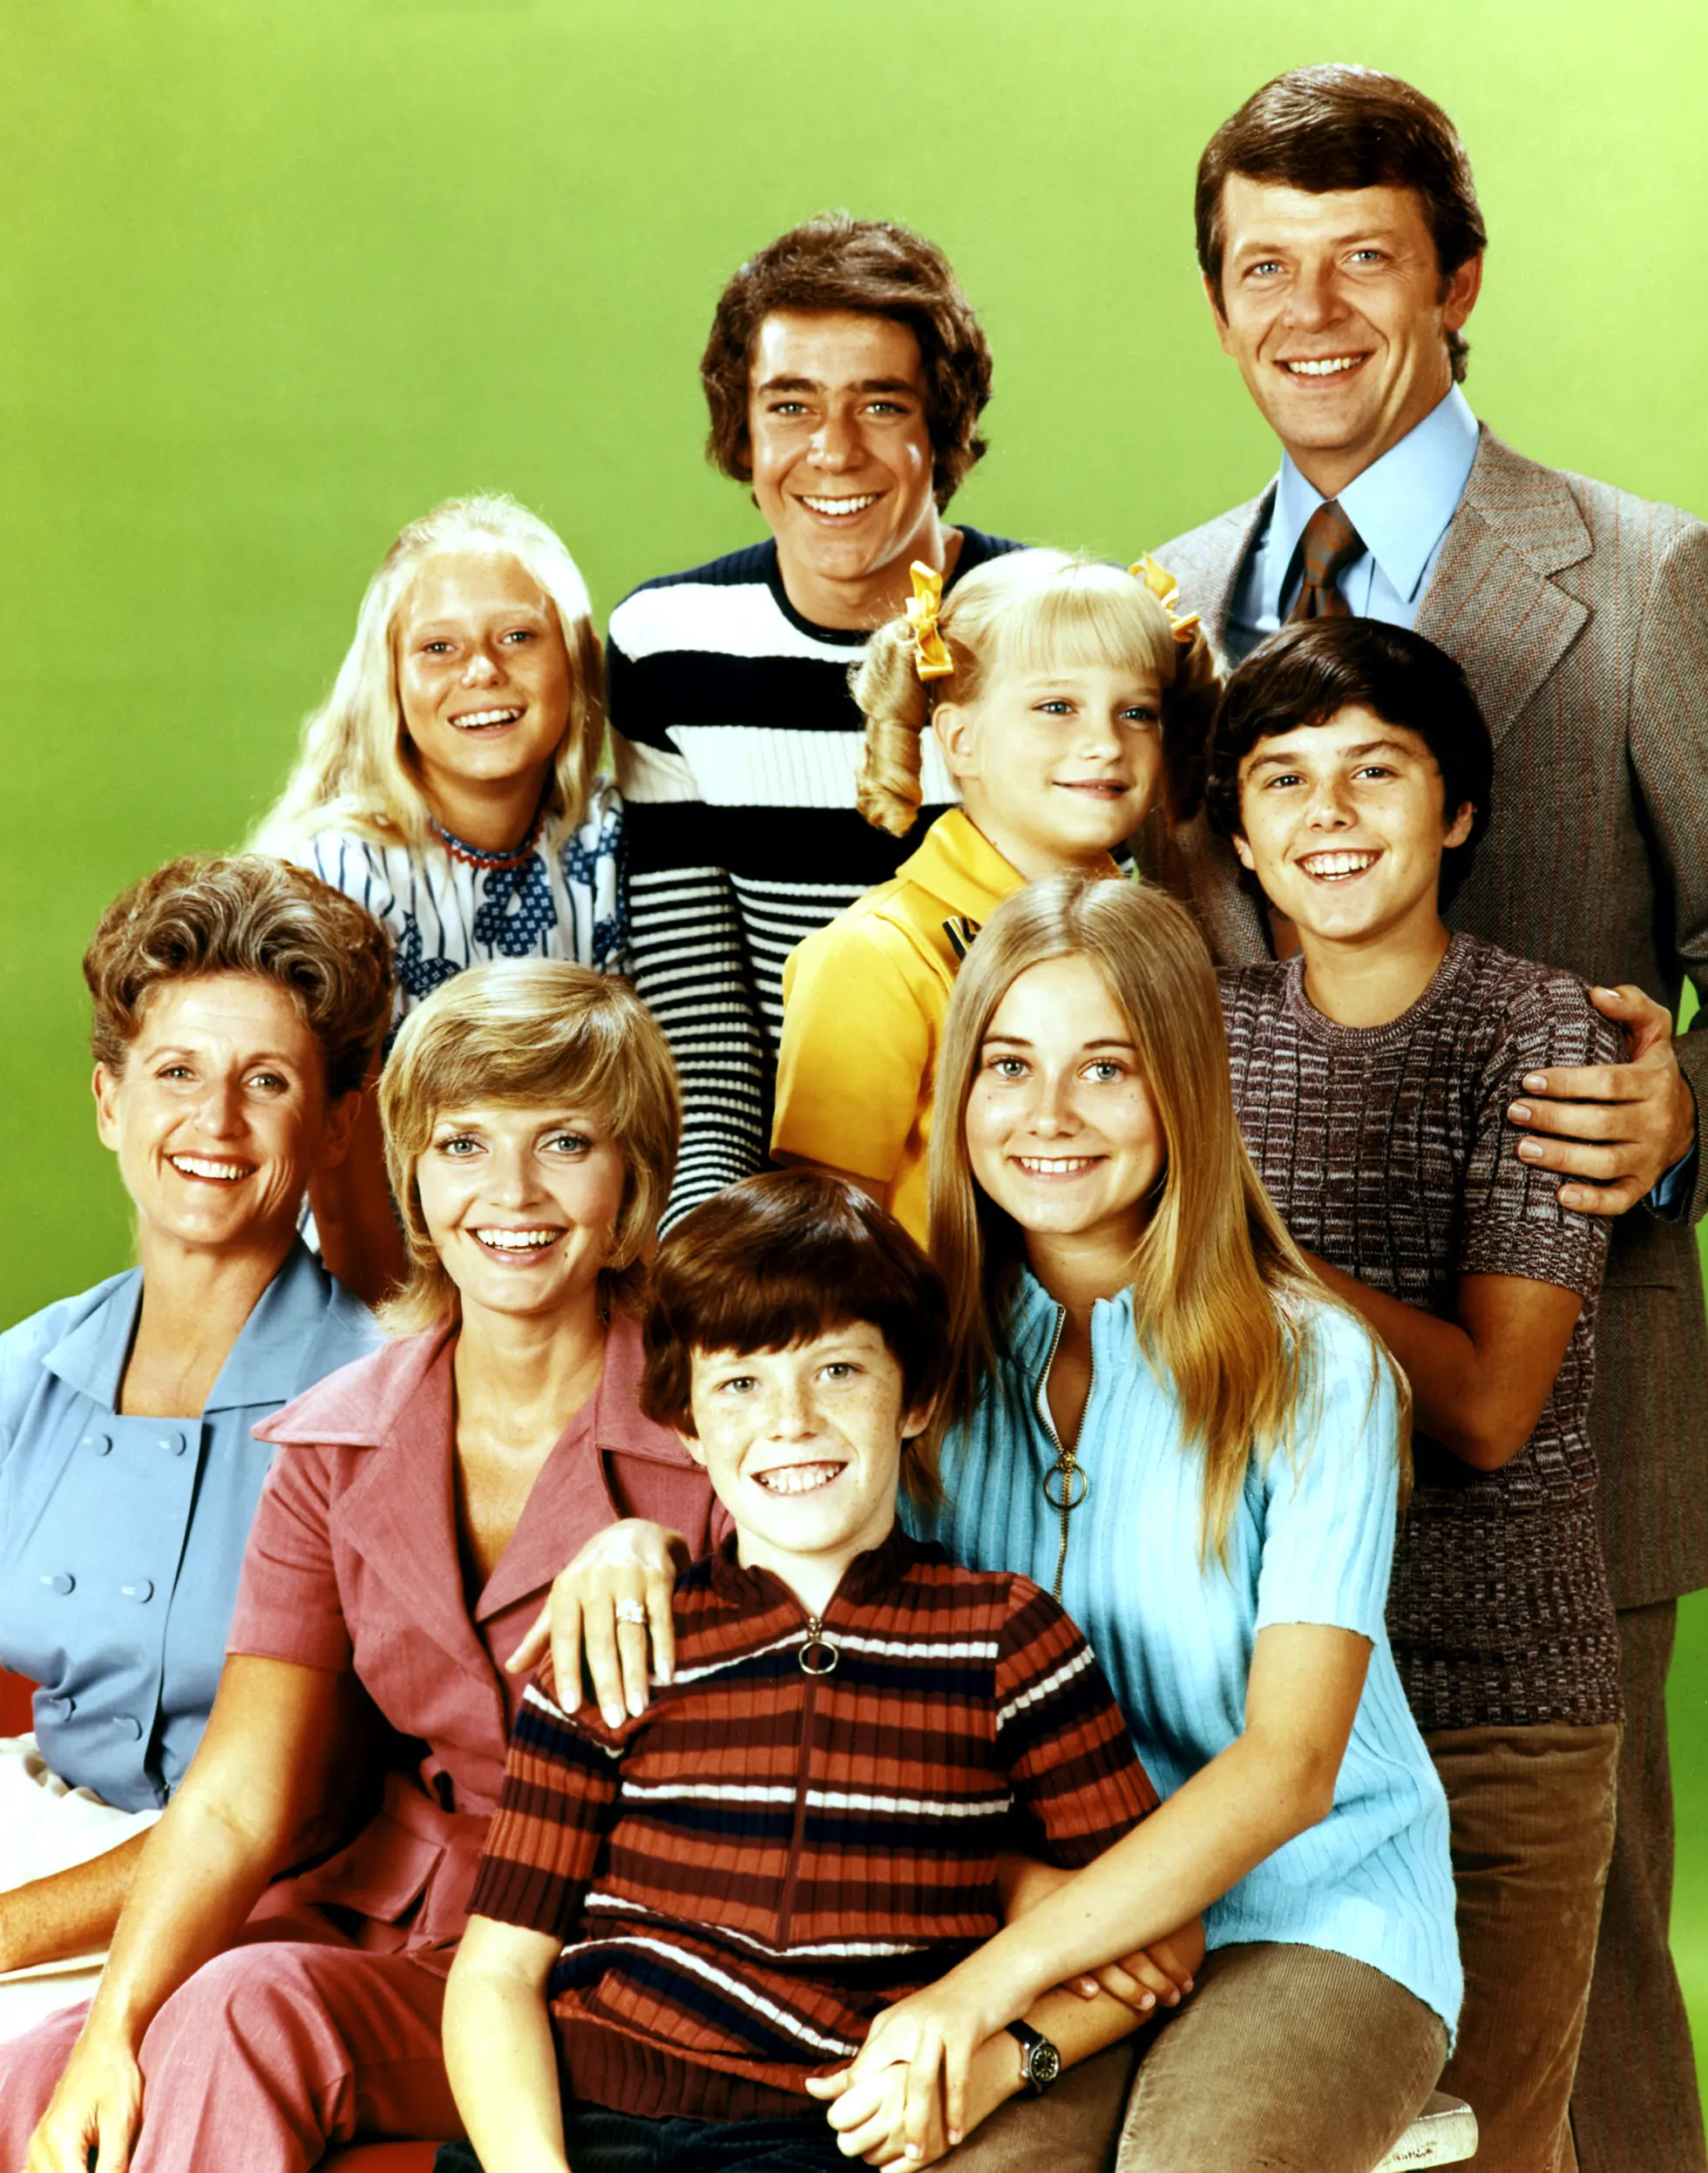 Florence Henderson Said It Wasn’t Always Easy To Work With The Kids On ‘The Brady Bunch’